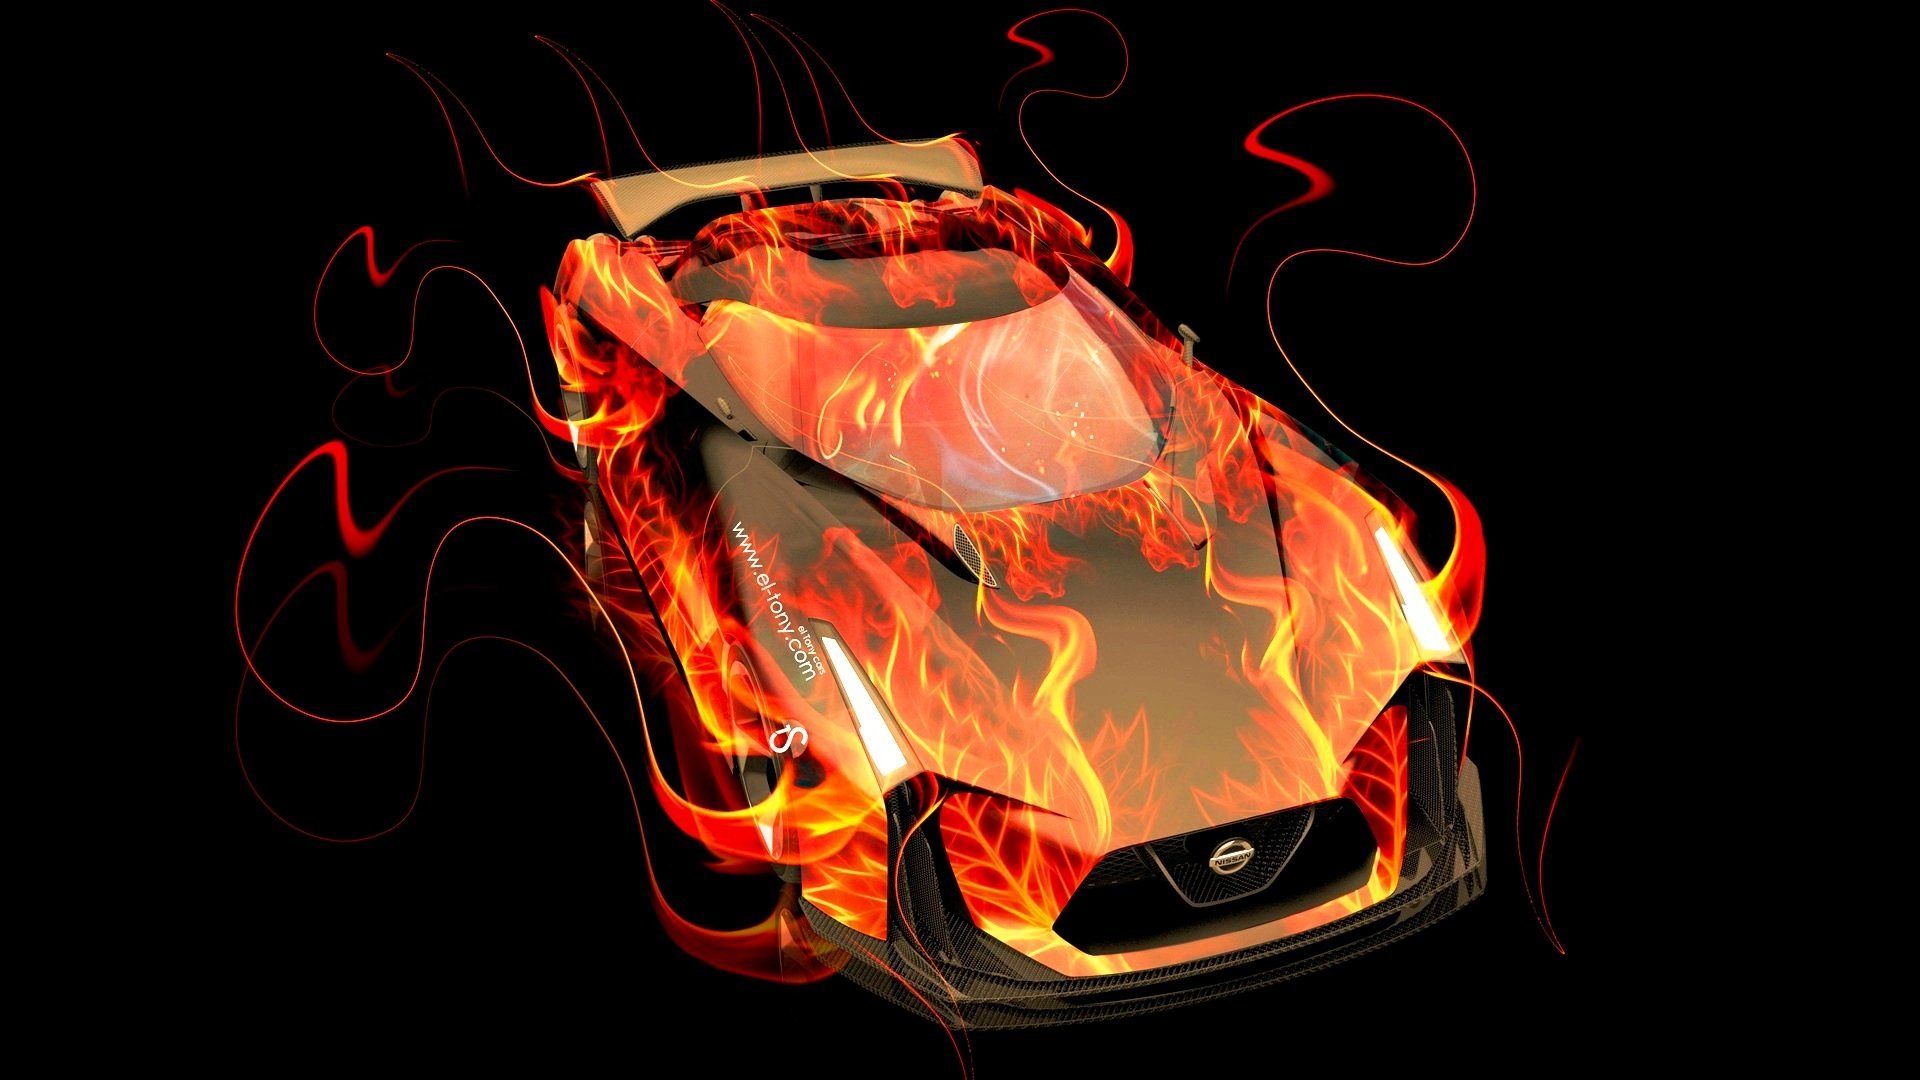 Design Talent Showcase Tony.com Brings Sensual Elements Fire And Water To YOUR Car Wallpaper 32